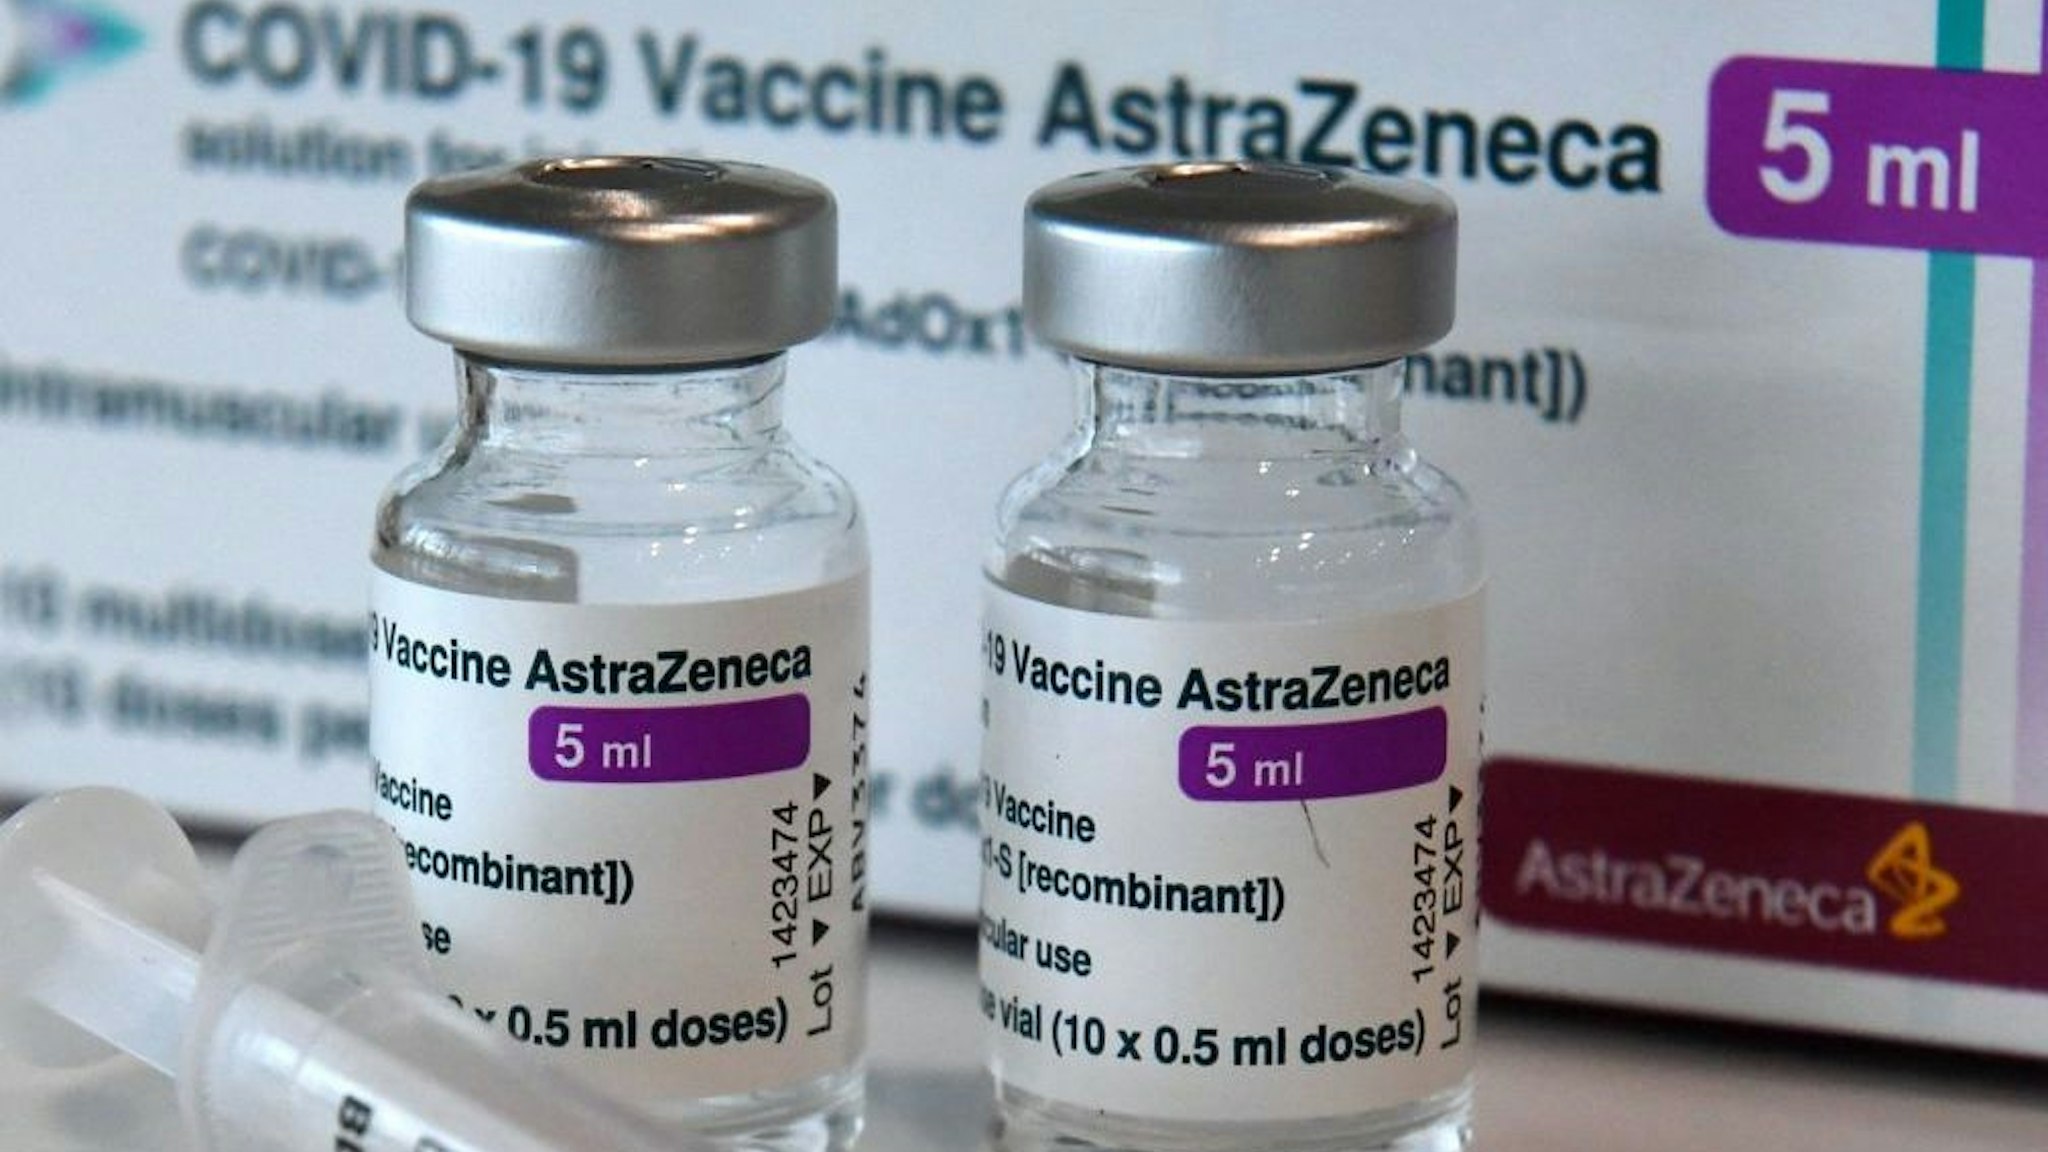 Vials with the AstraZenaca COVID-19 vaccine against the novel coronavirus are pictured at the vaccination center in Nuremberg, southern Germany, on March 18, 2021. - Germany on March 15 halted the use of AstraZeneca's coronavirus vaccine after reported blood clotting incidents in Europe, saying that a closer look was necessary.